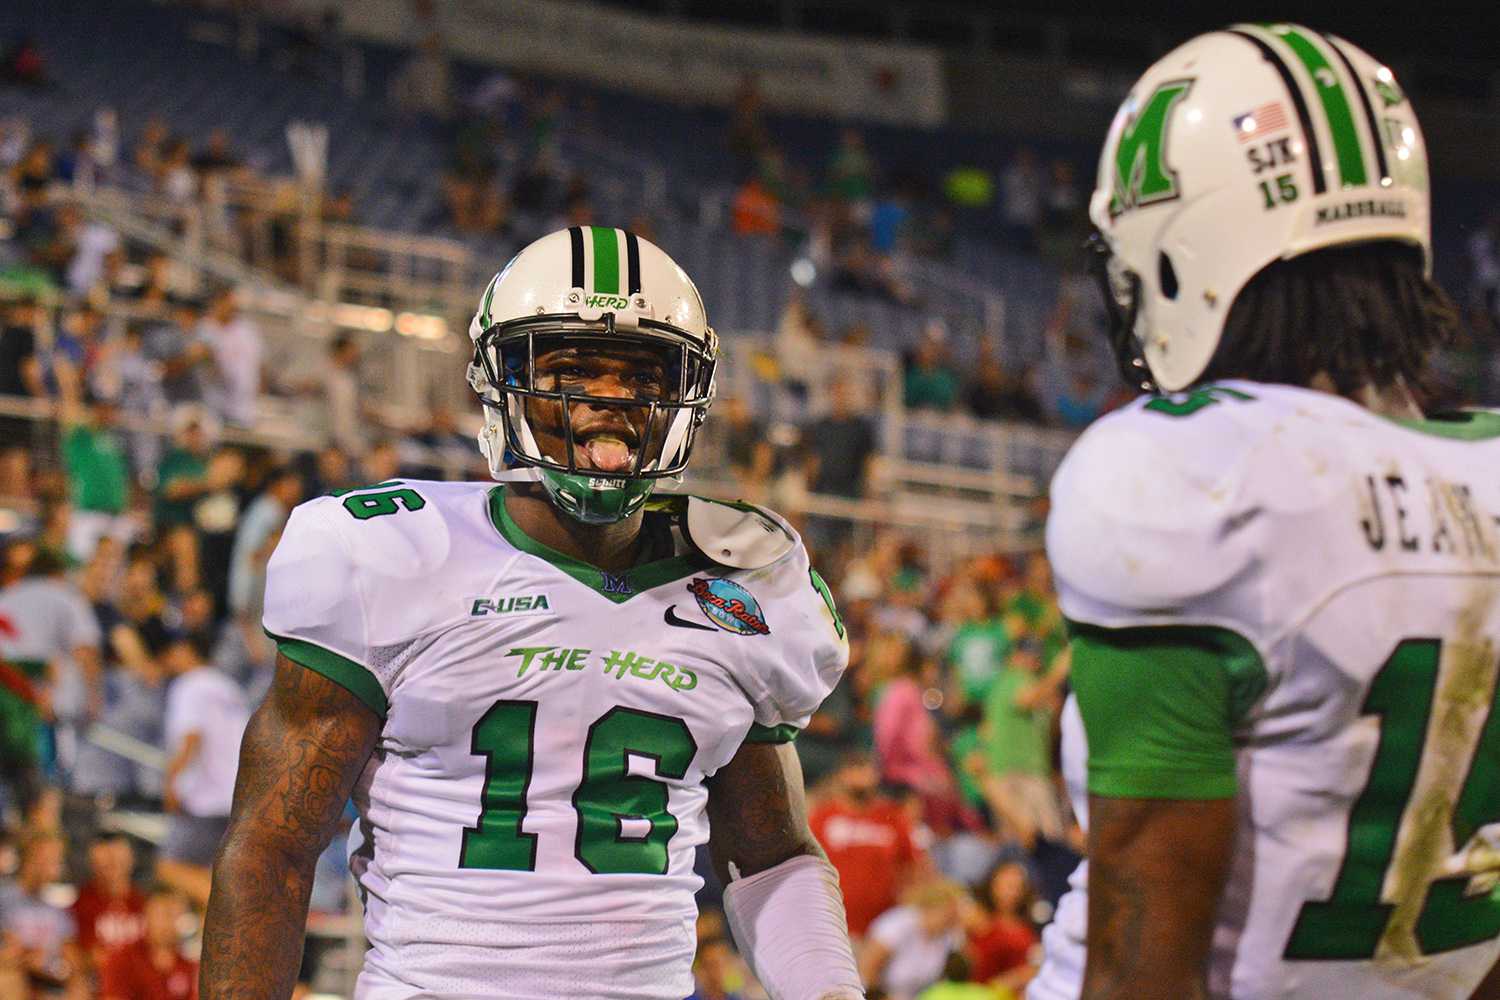 Deon-Tay McManus celebrates with Angelo Jean-Louis after he (McManus) scored a touchdown. McManus, a wide receiver from Baltimore, caught a 27-yard pass from Marshall QB Rakeem Cato, and after the extra point, the score stood at 45-20 in favor of the Thundering Herd. 